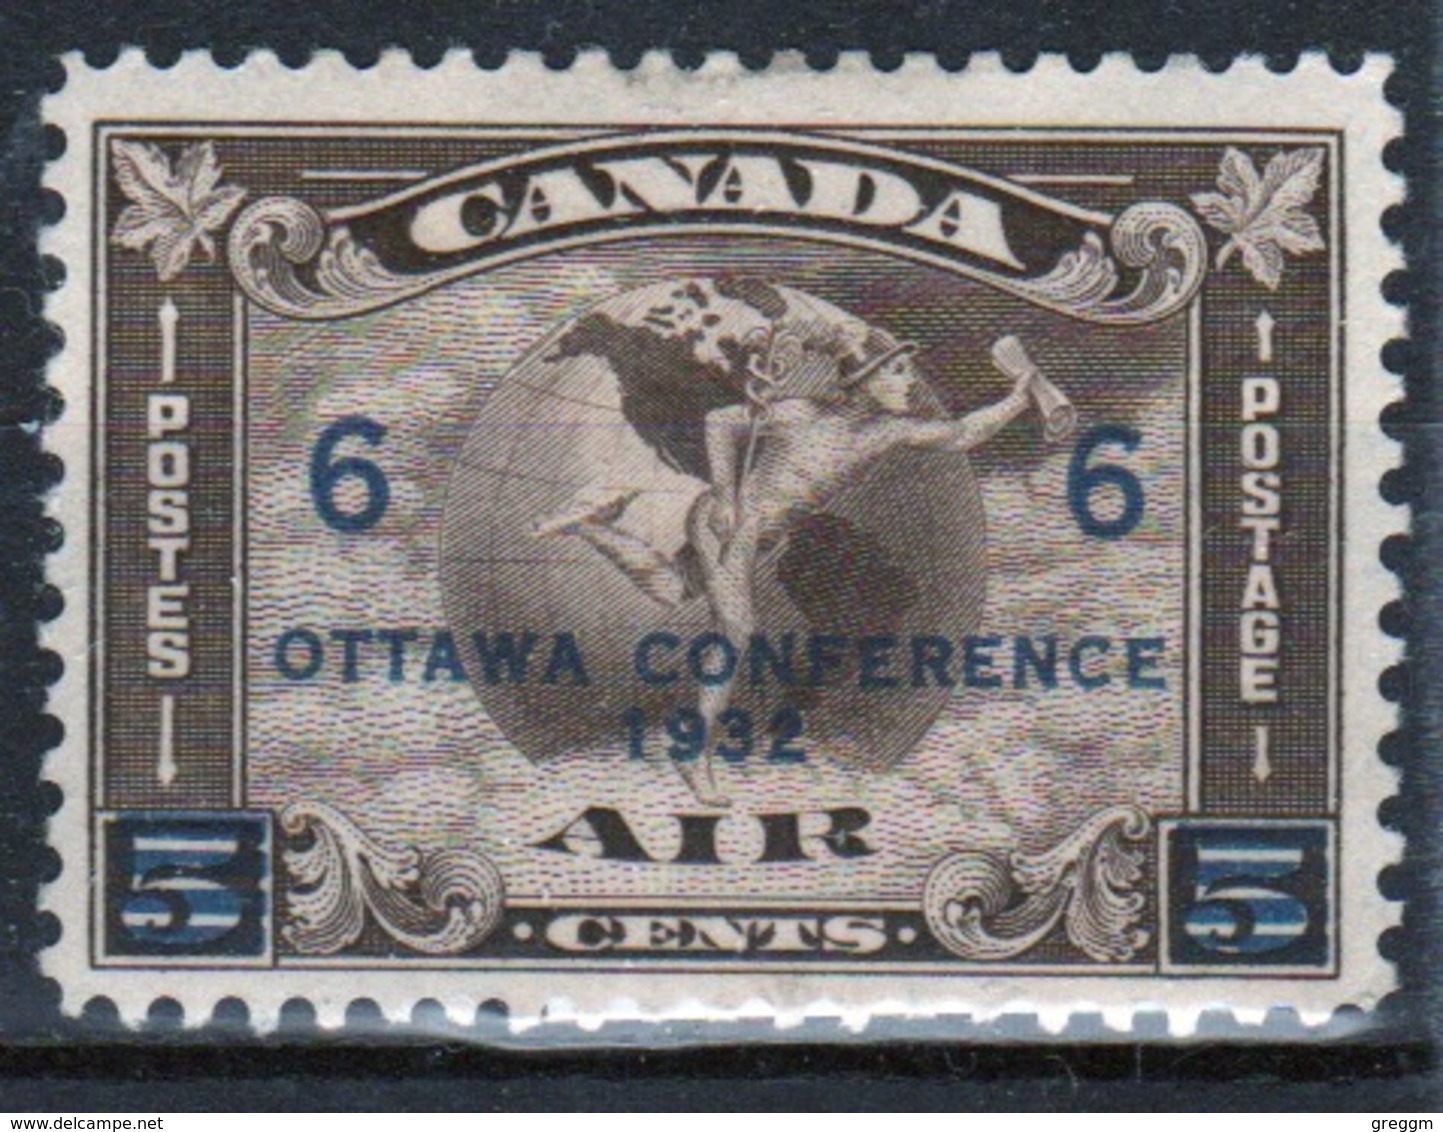 Canada 1934 Single 5 Cent Stamp To Celebrate The Ottawa Conference With 6c Overprint. - Unused Stamps